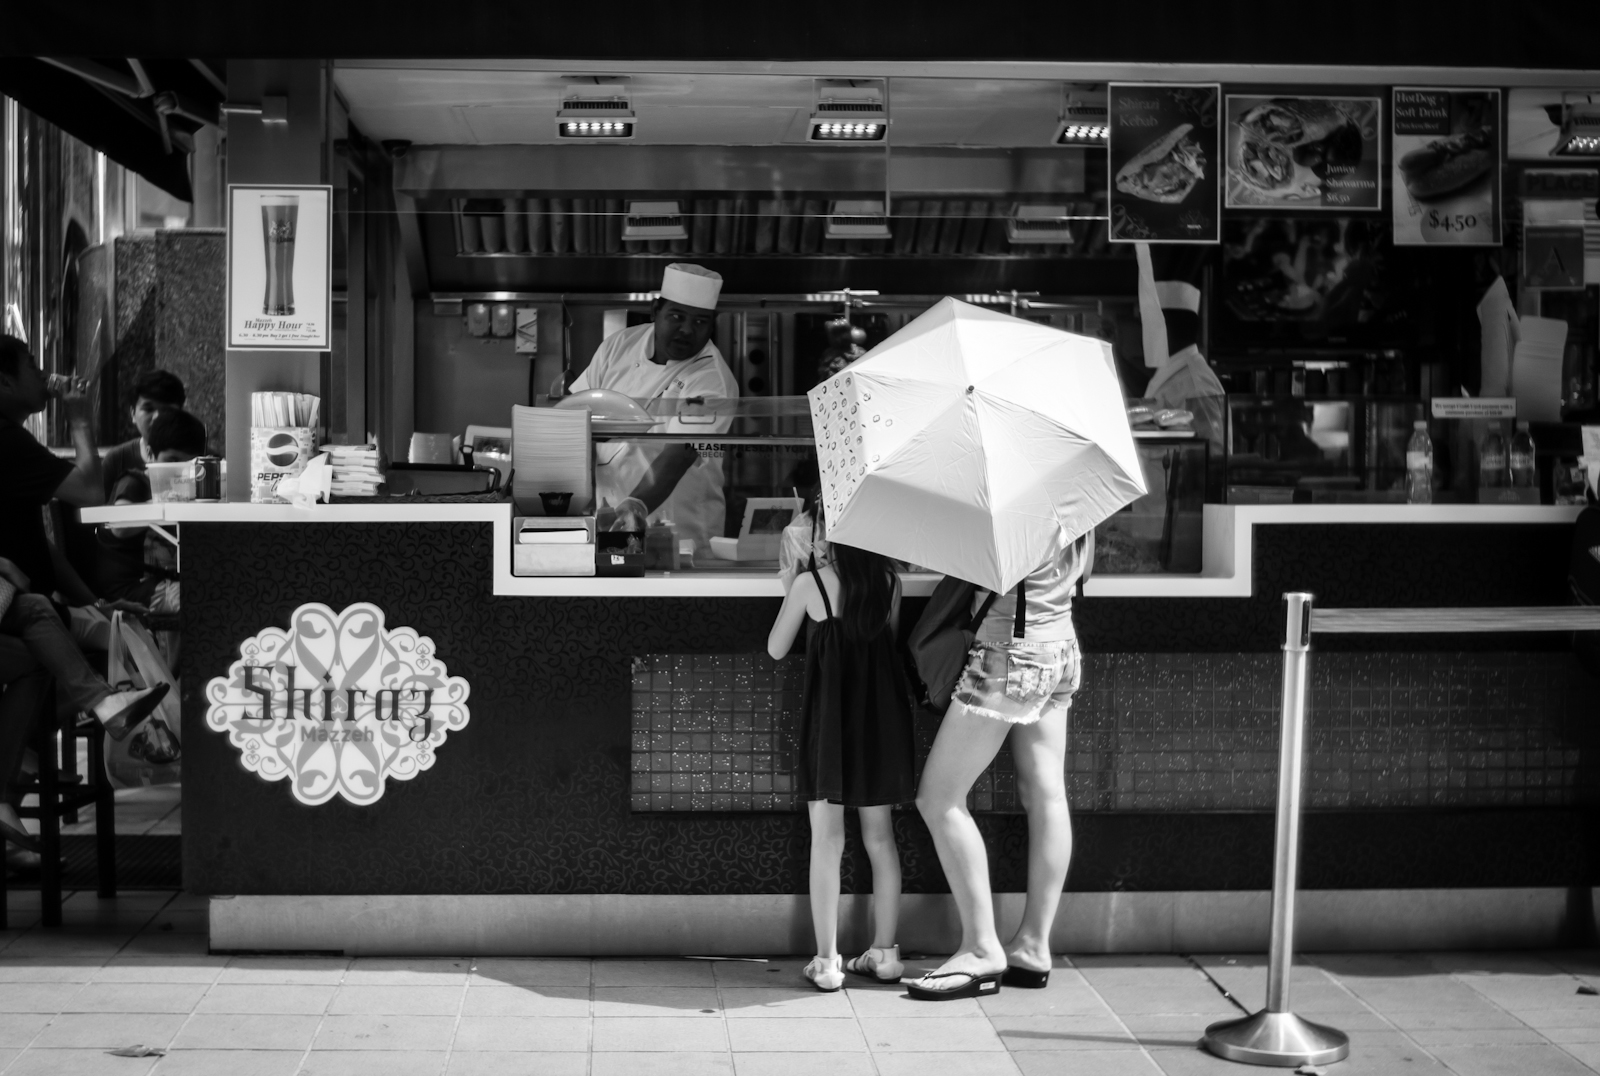 Mother and daughter standing beneath their umbrella while ordering food